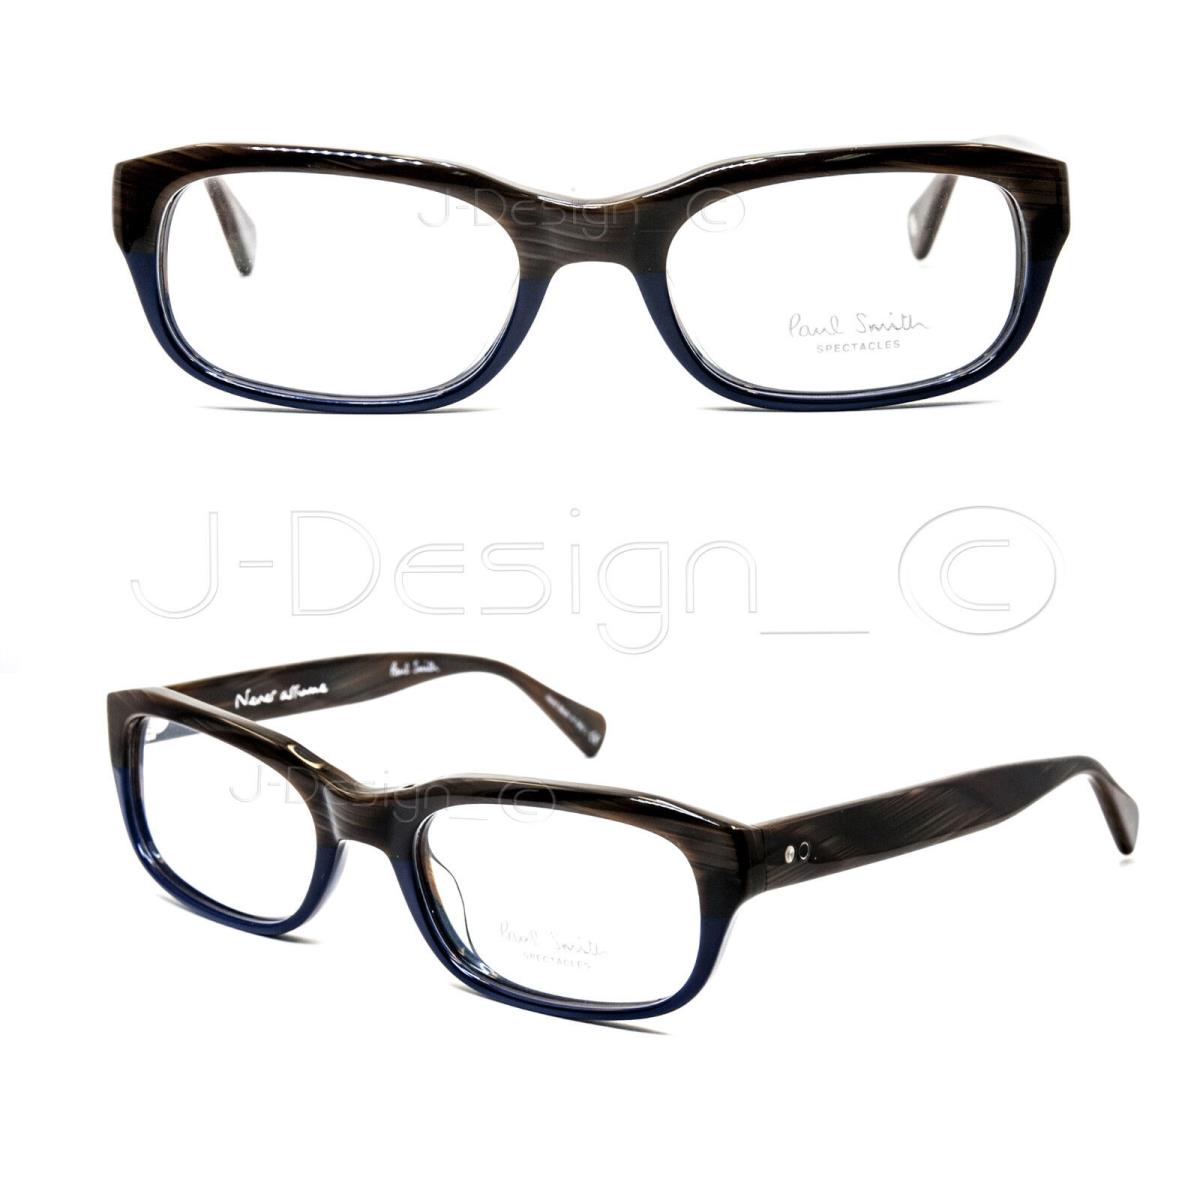 Paul Smith PM8166 1230 Kemble 51/19/145 Eyeglasses Made in Italy